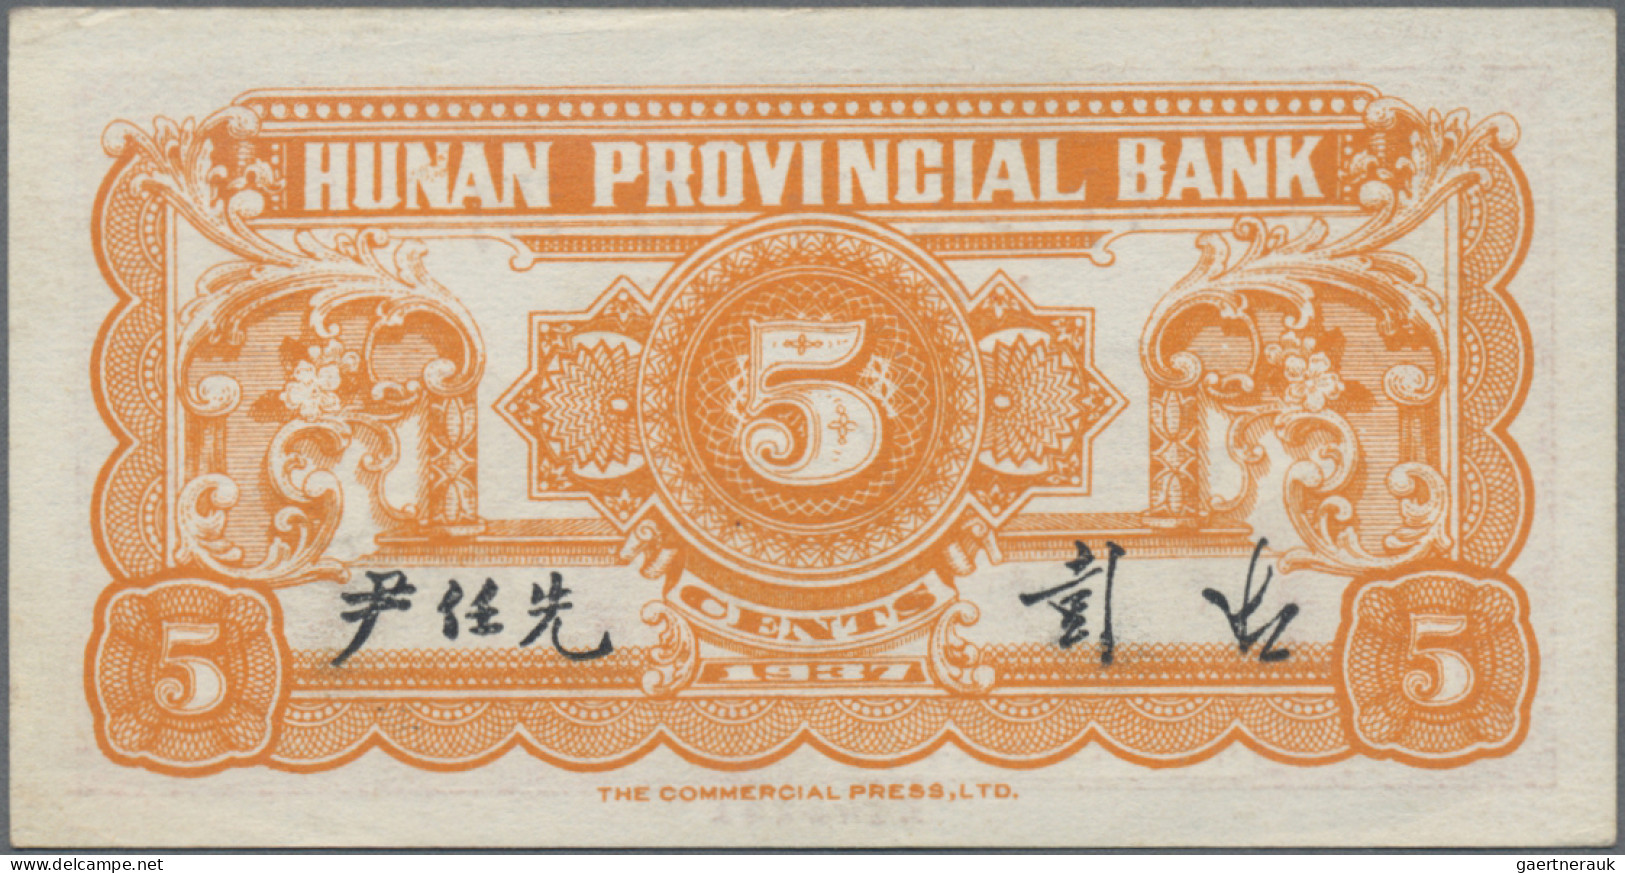 China: Nice lot with 4 banknotes, serie 1913-1937, comprising for the HUNAN PROV